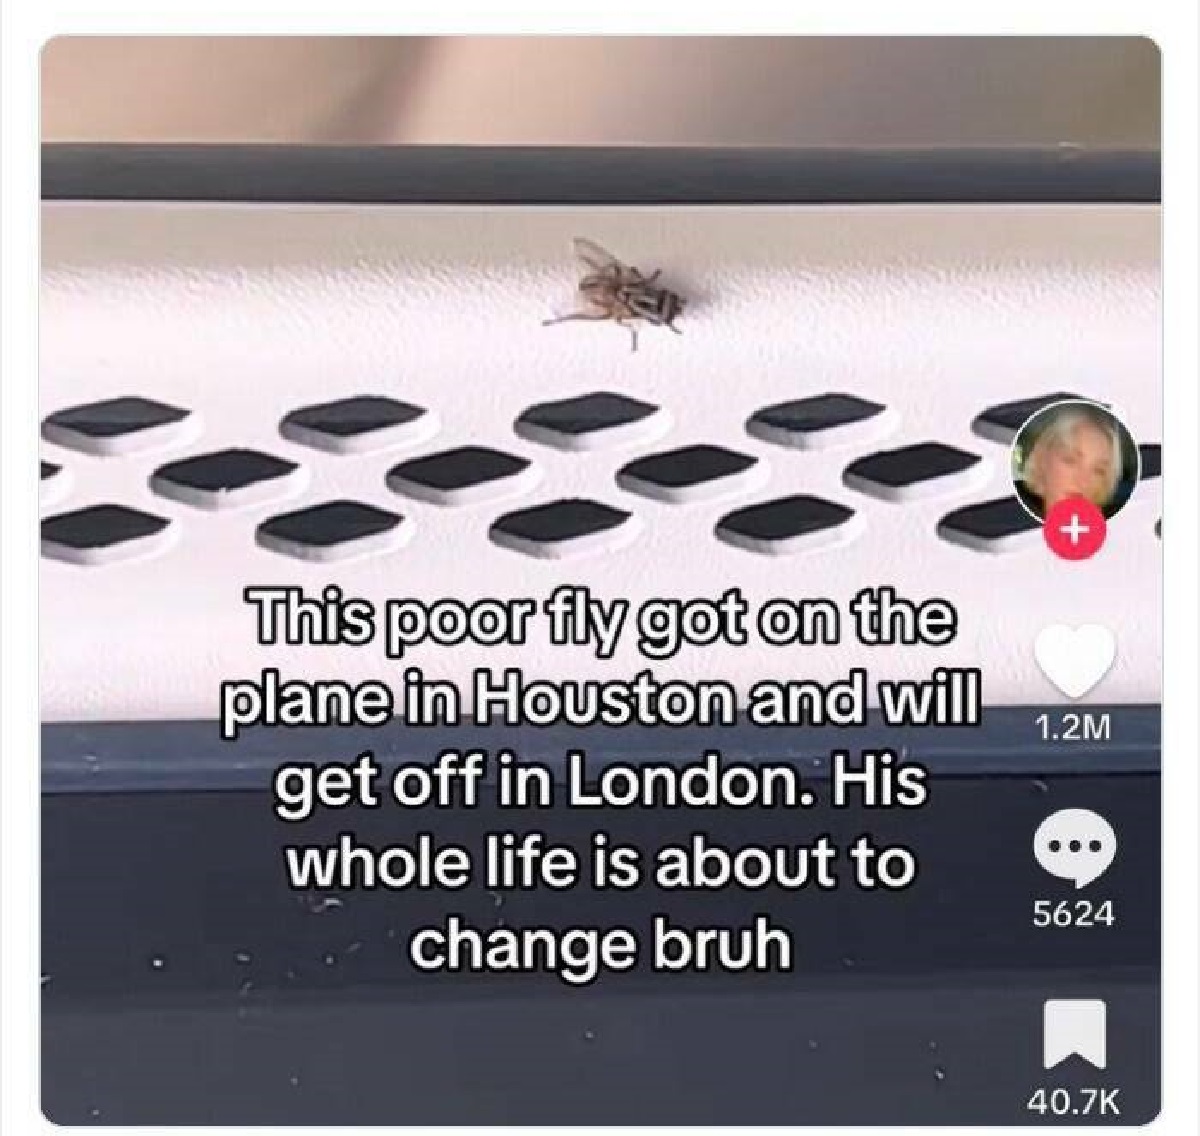 Meme - This poor fly got on the plane in Houston and will get off in London. His whole life is about to change bruh 1.2M 5624